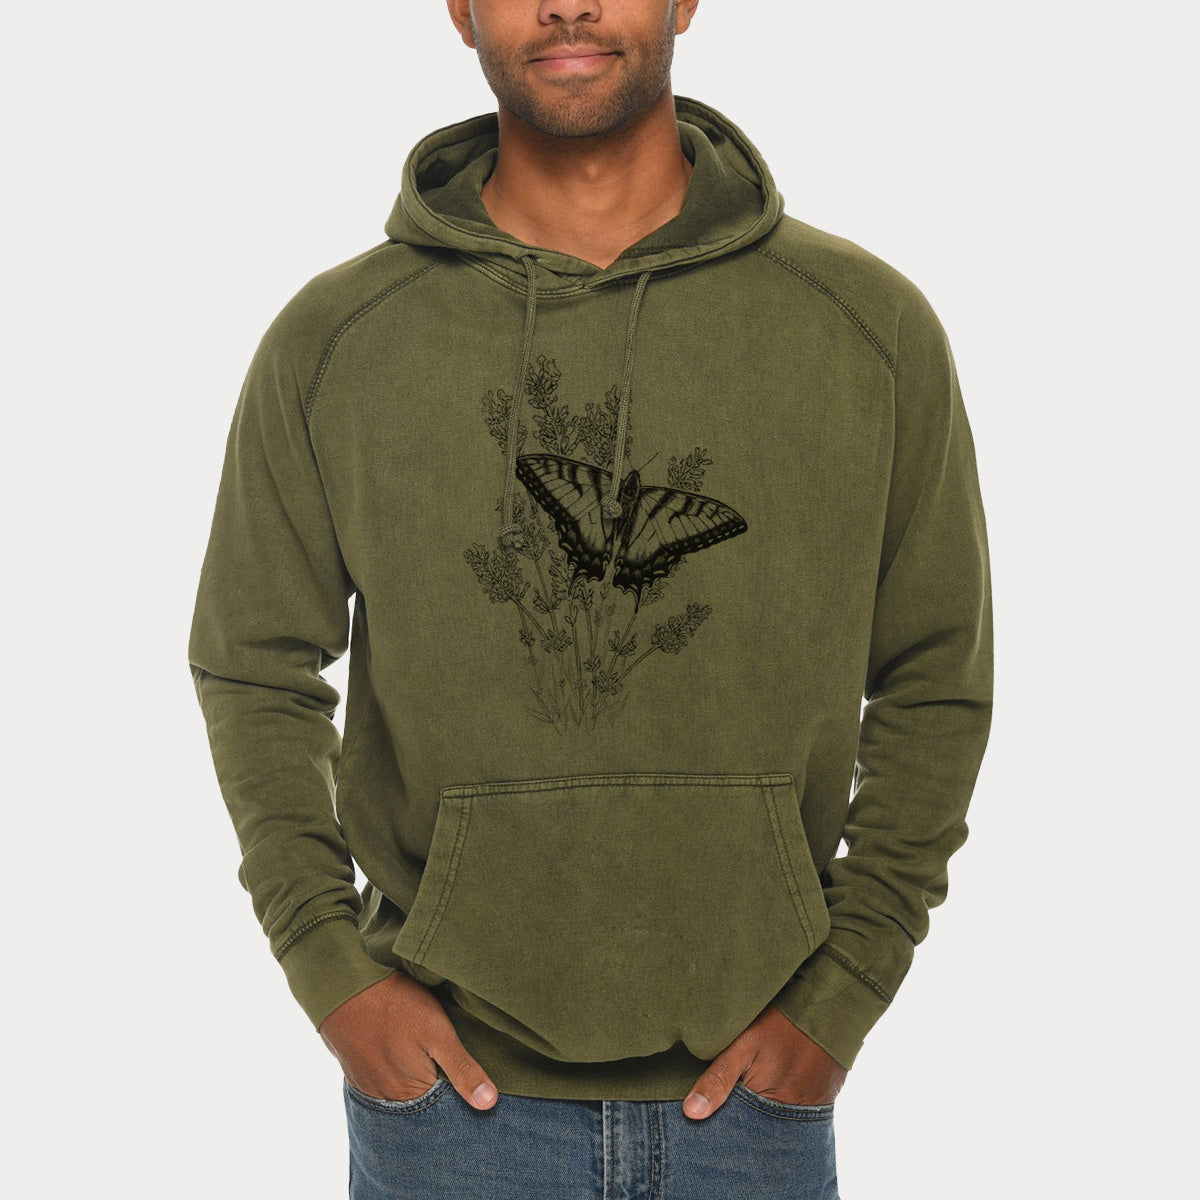 Eastern Tiger Swallowtail with Lavender  - Mid-Weight Unisex Vintage 100% Cotton Hoodie